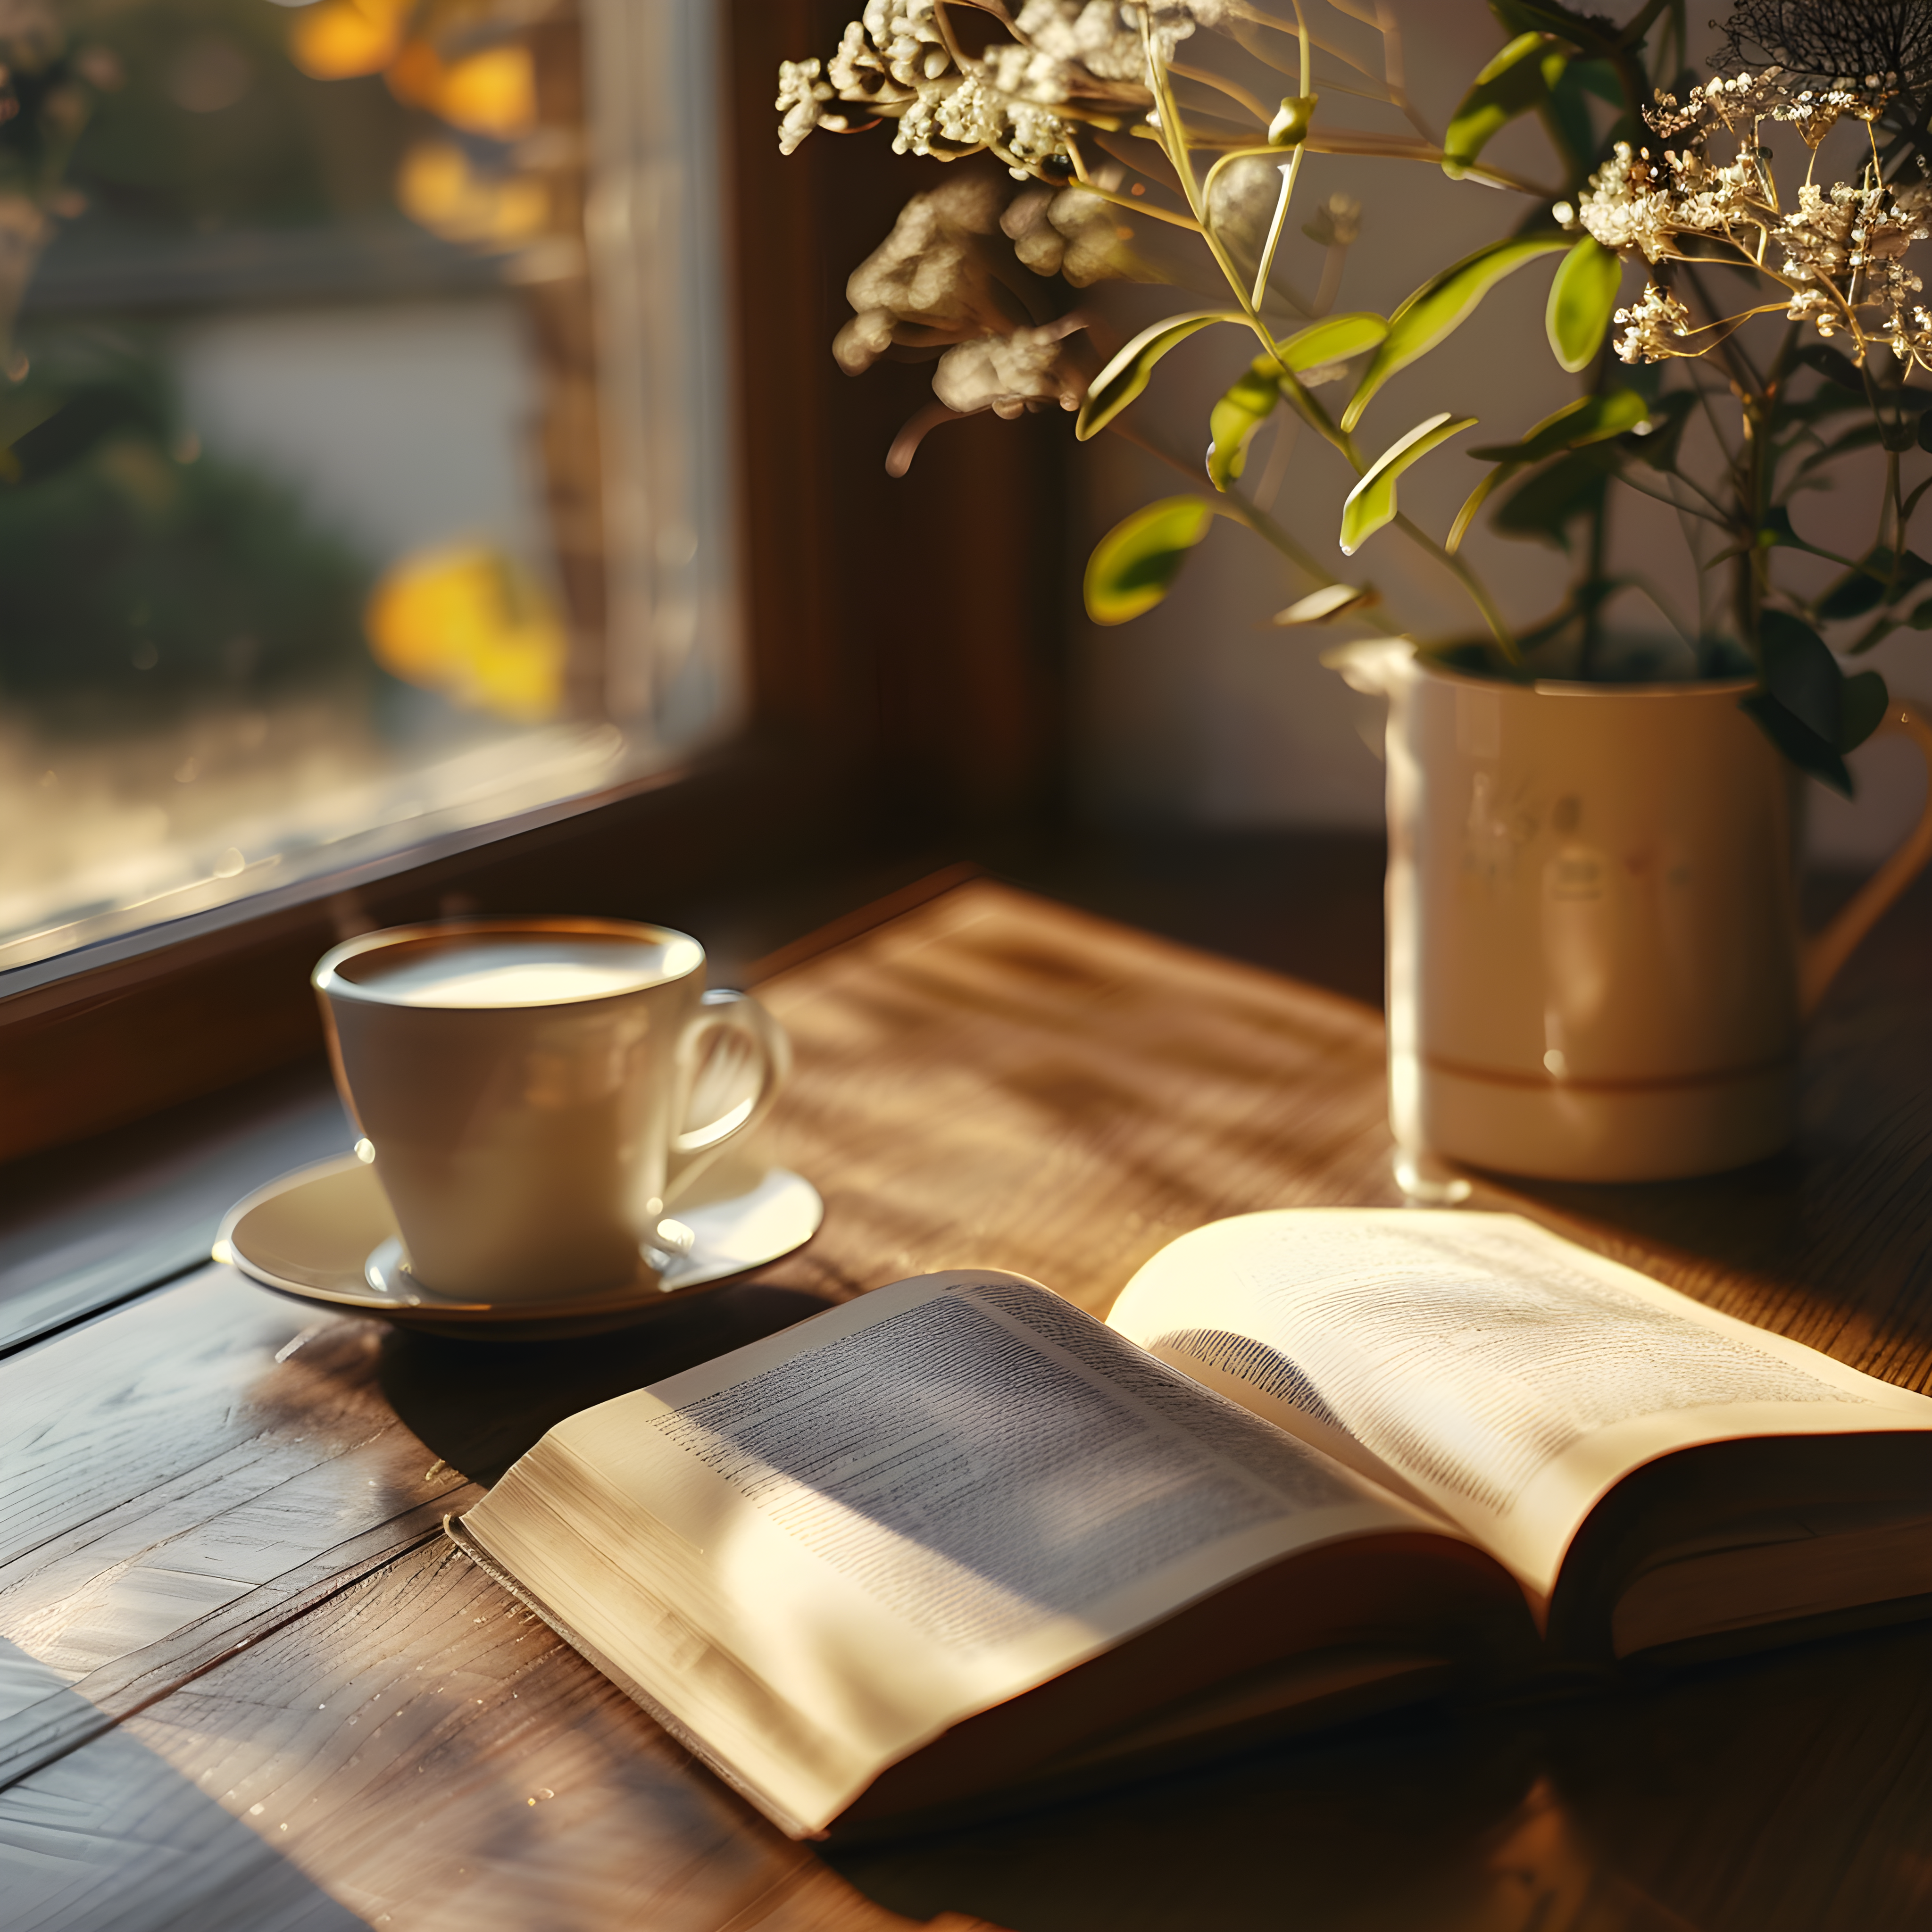 Book on wooden table with a cup of coffee and coffee beans on the table